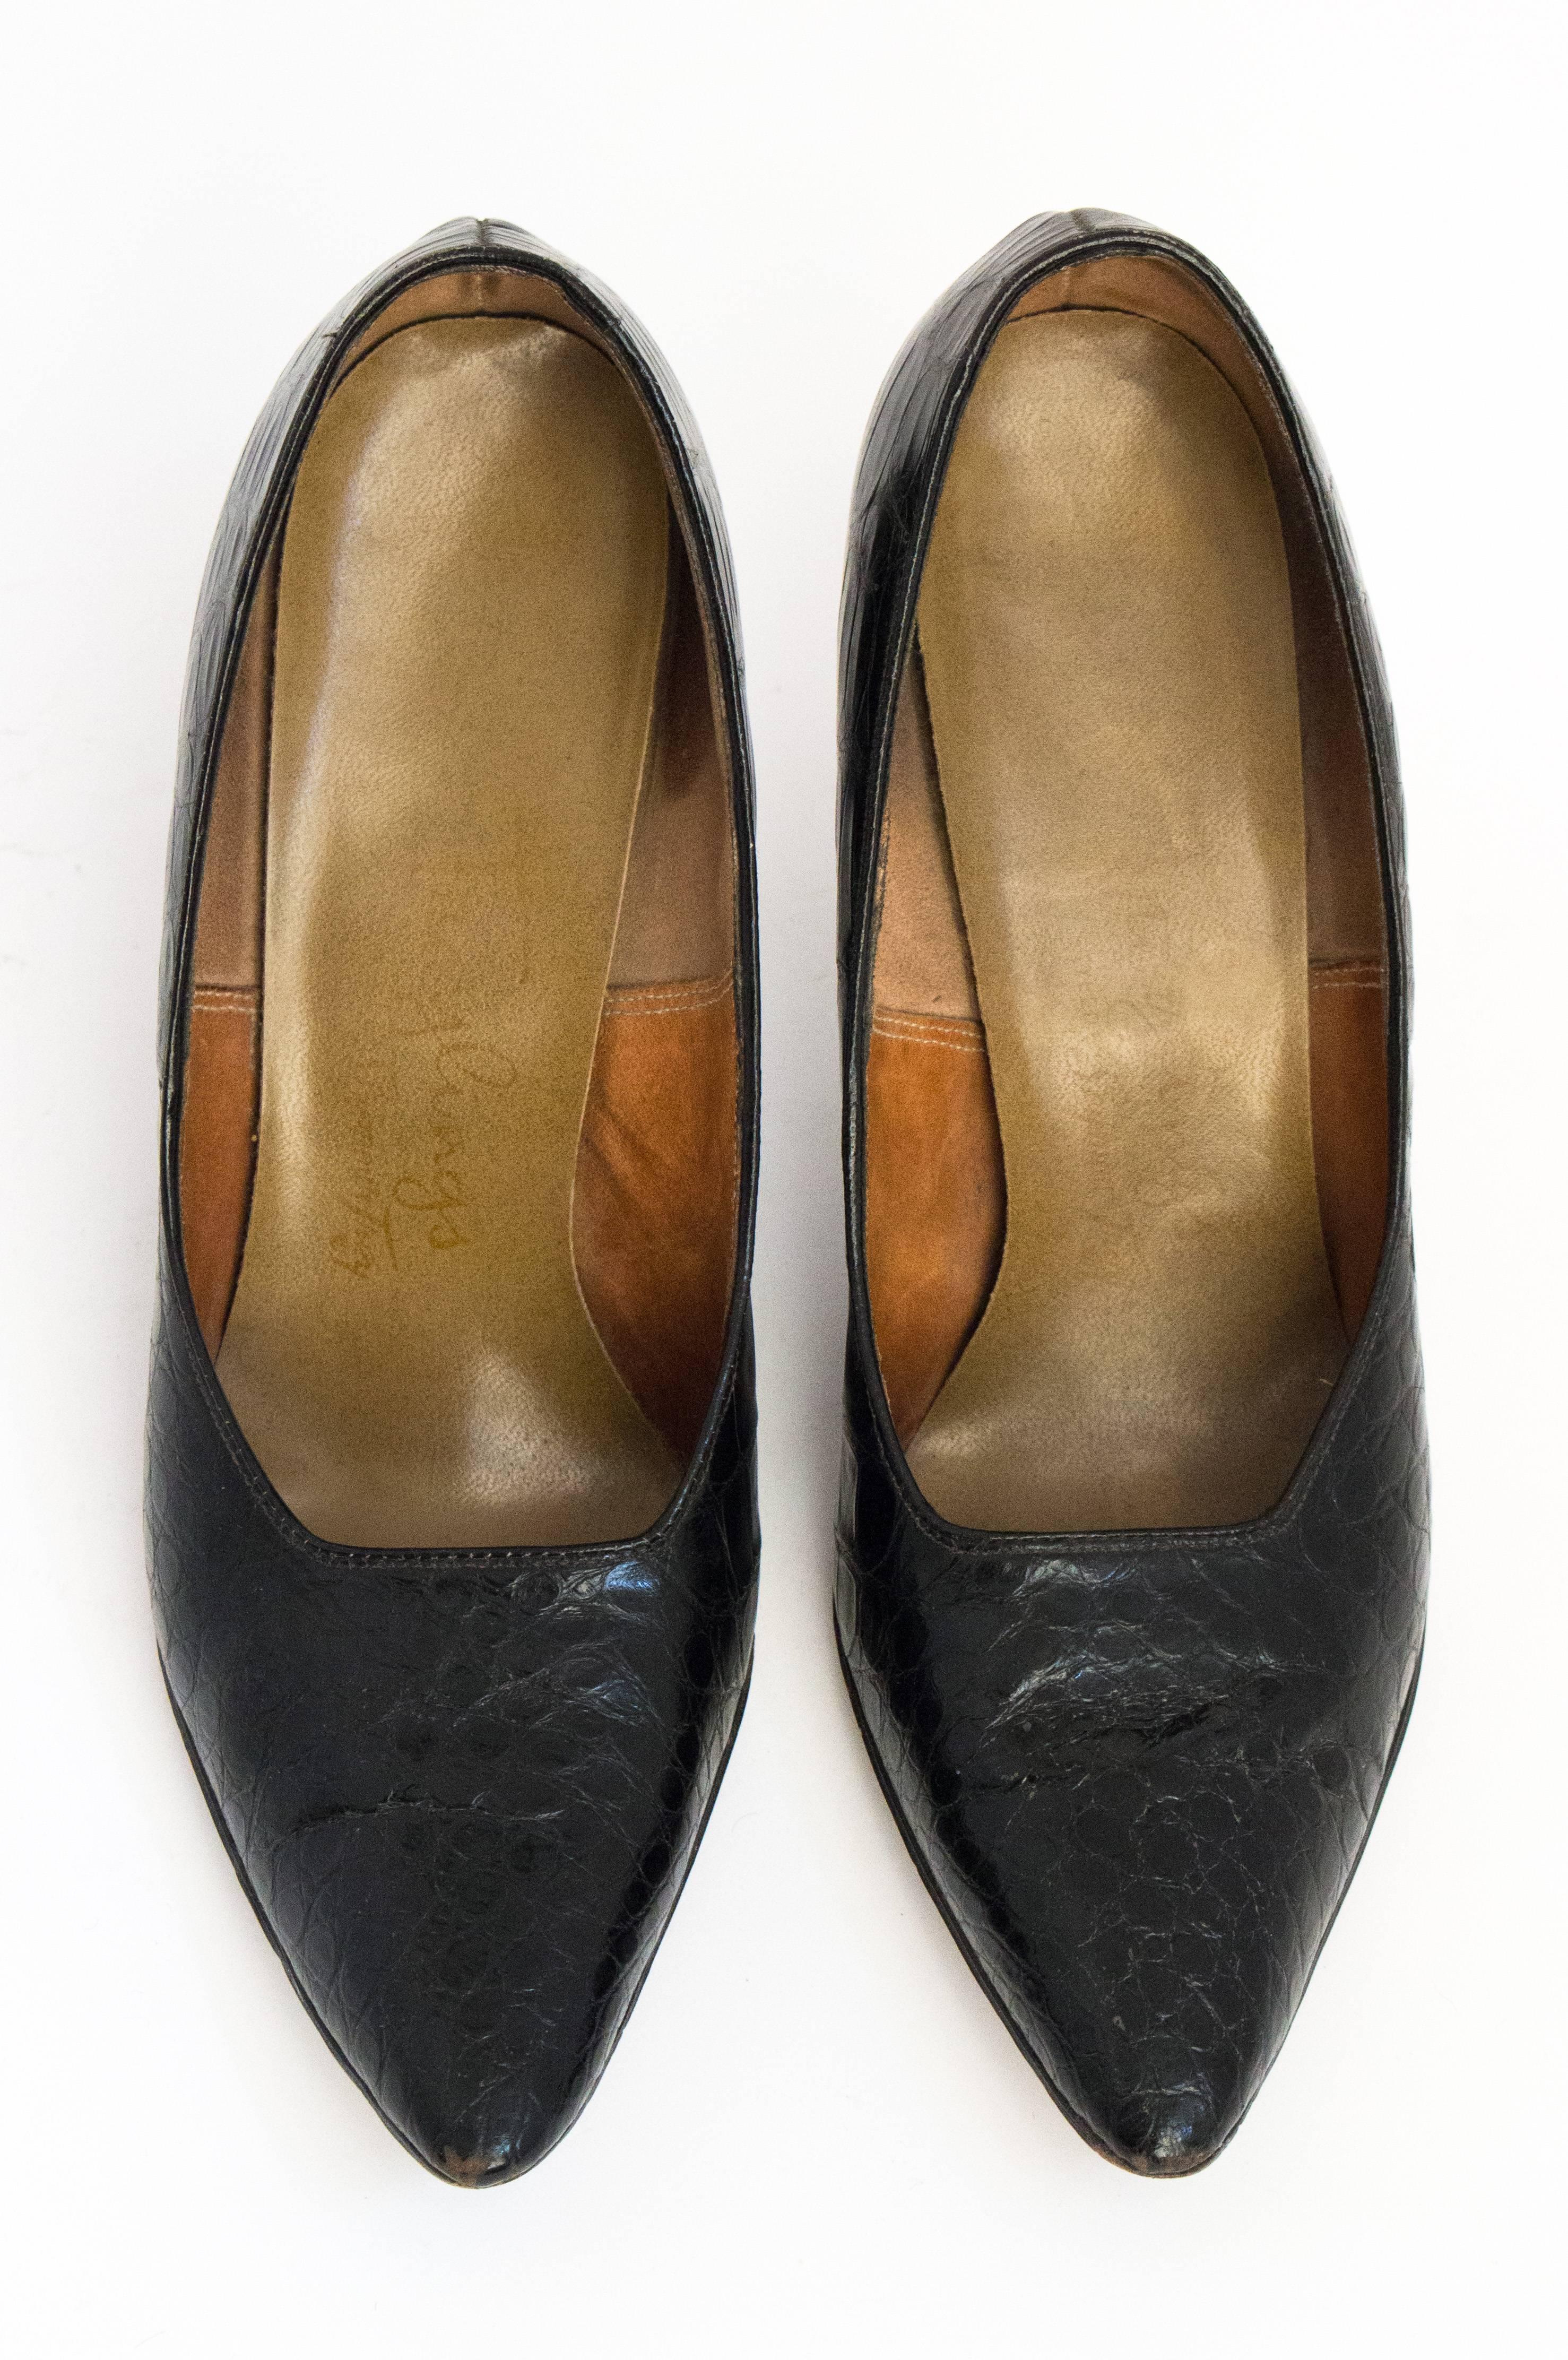 60s black alligator pointed toe stilettos. Leather soles. Original heel caps. 

Measurements:
Insole: 10 1/4"
Palm of the Foot: 3"
Heel Height: 3 1/2"

Approximately a size 7 1/2